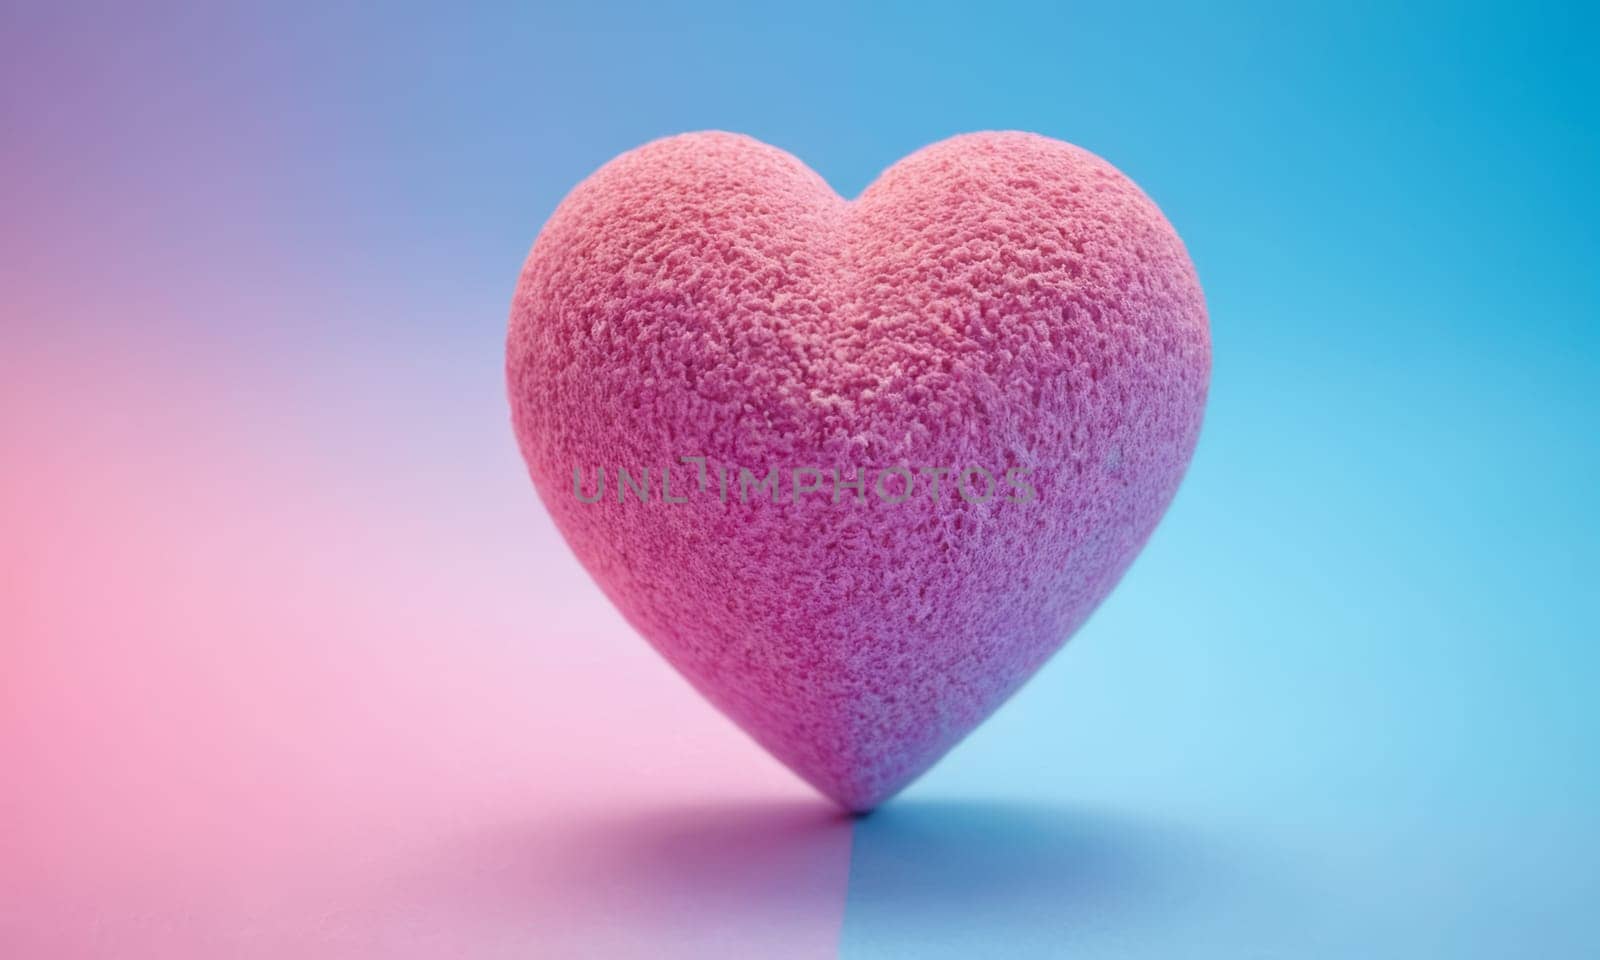 Textured heart shape on pastel background by Andre1ns